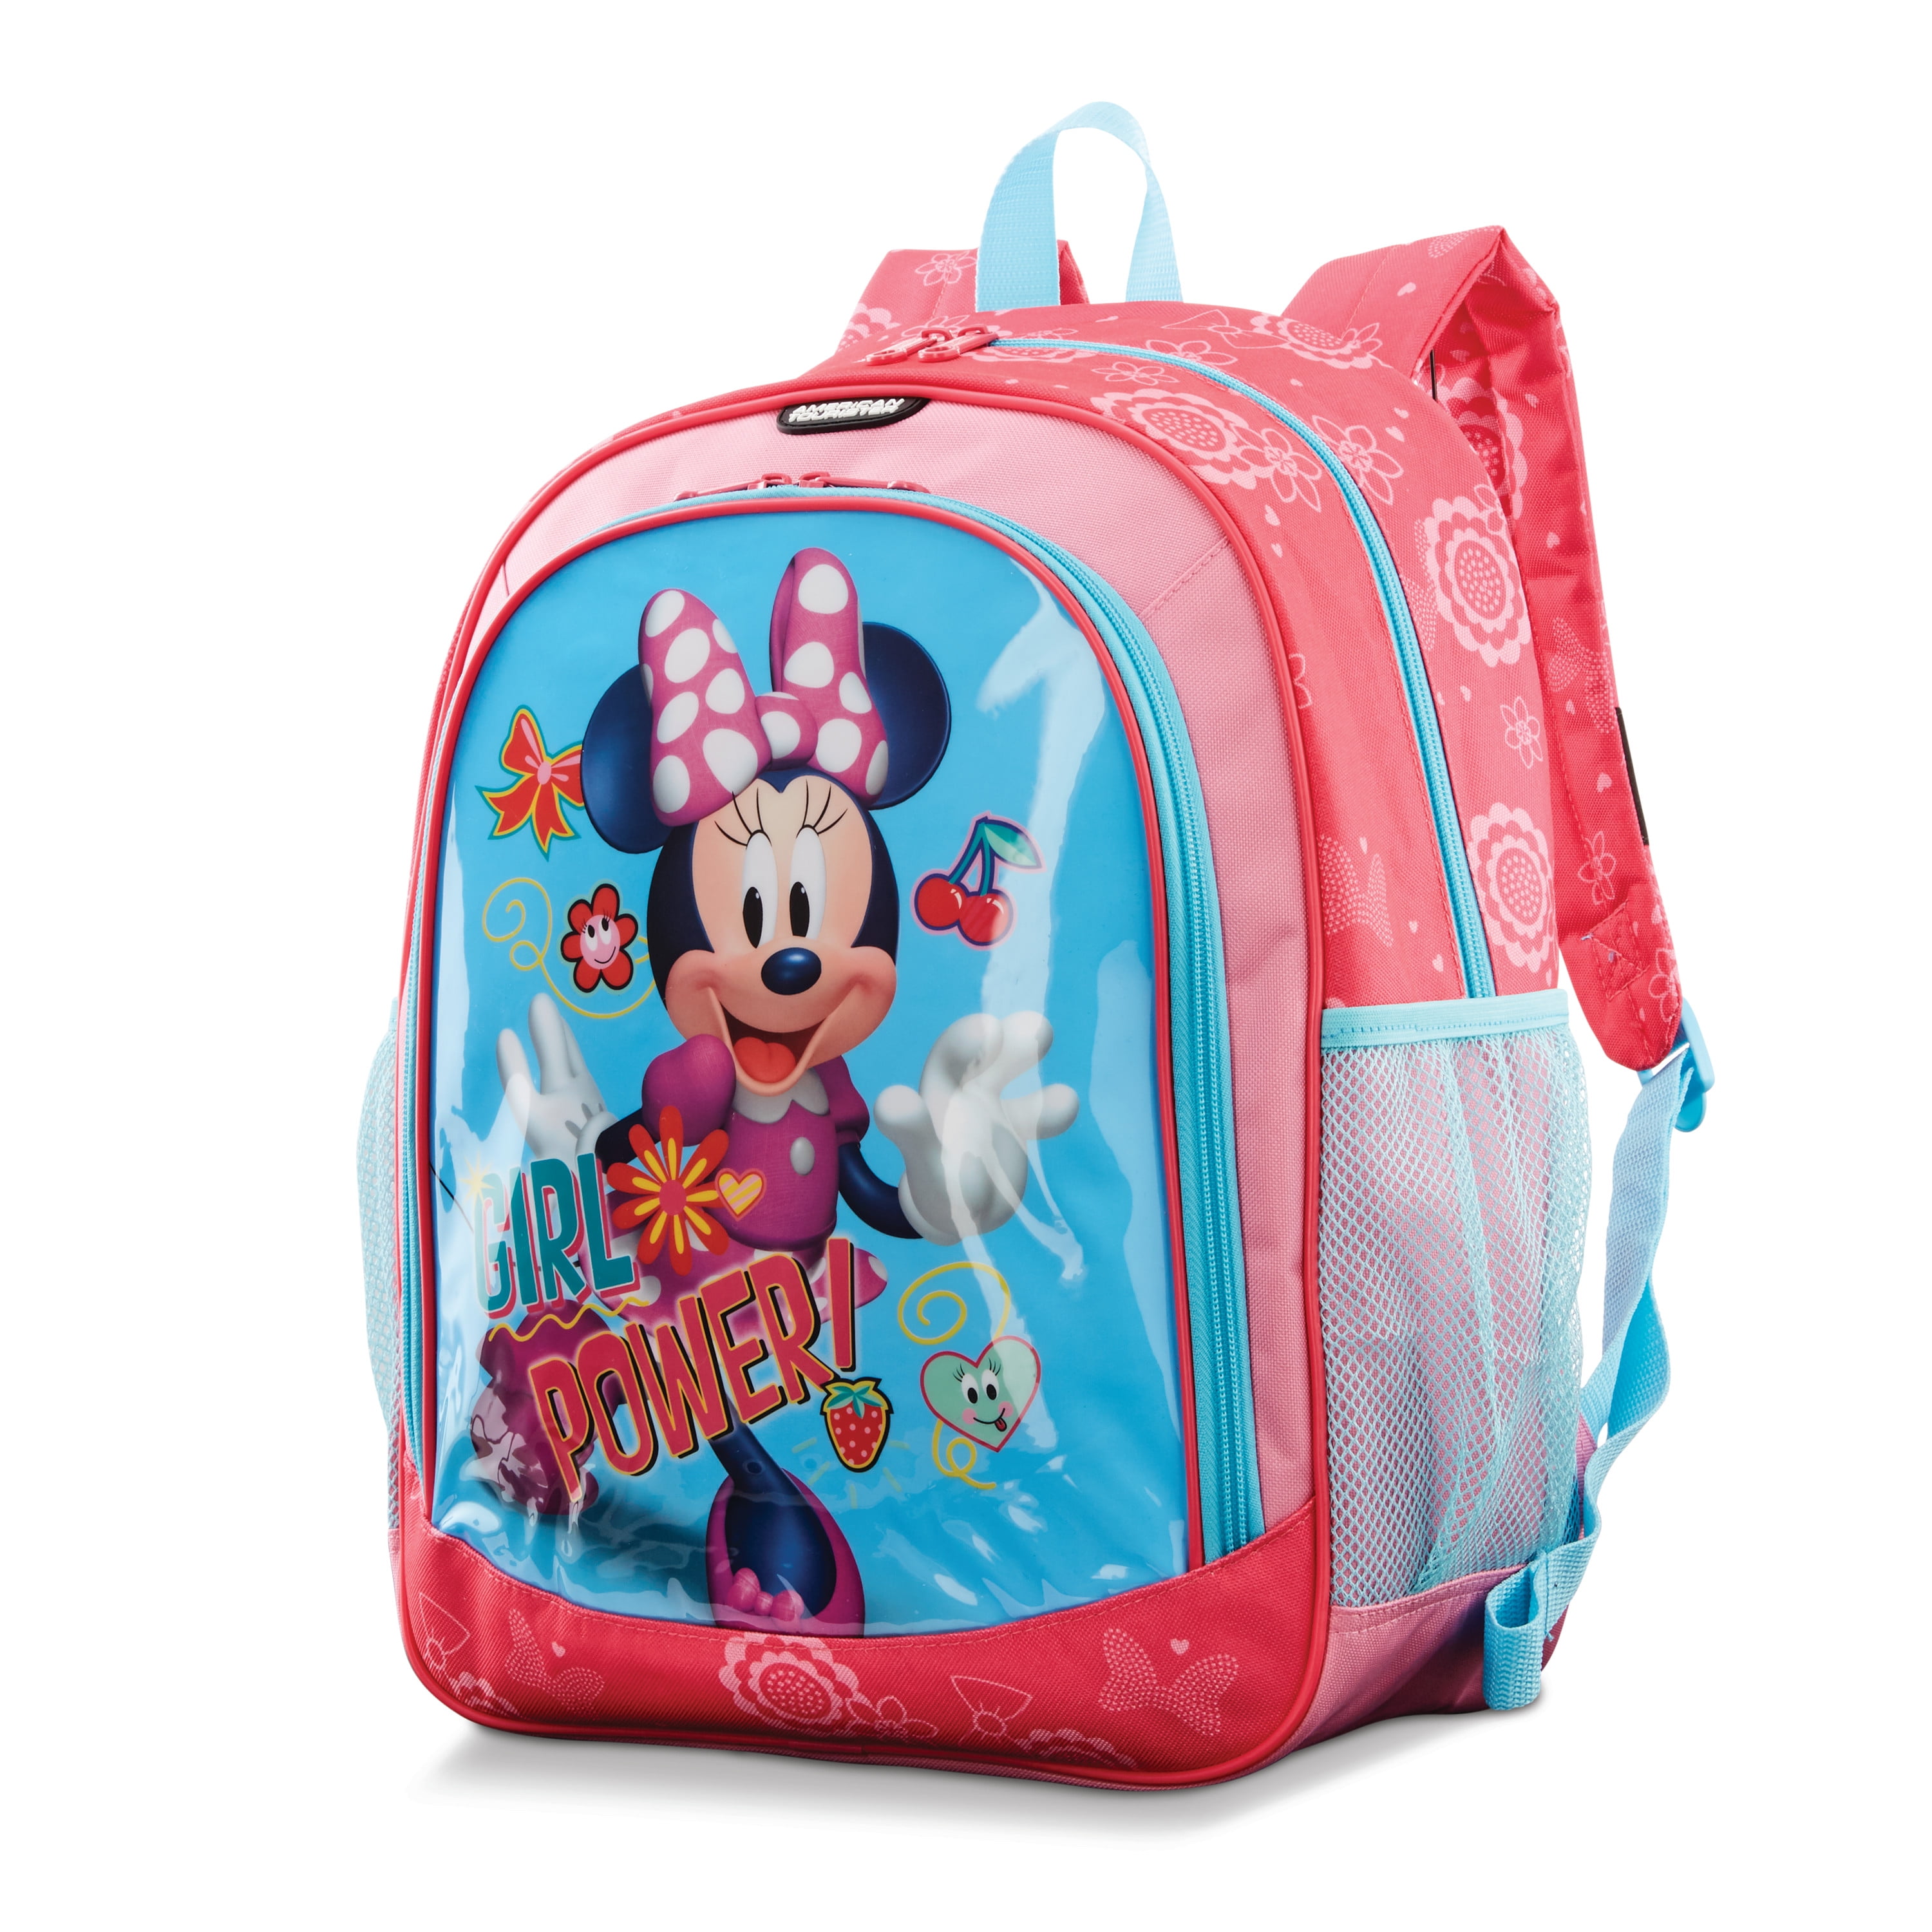 American Tourister Disney's Mickey Mouse Backpack, Blue